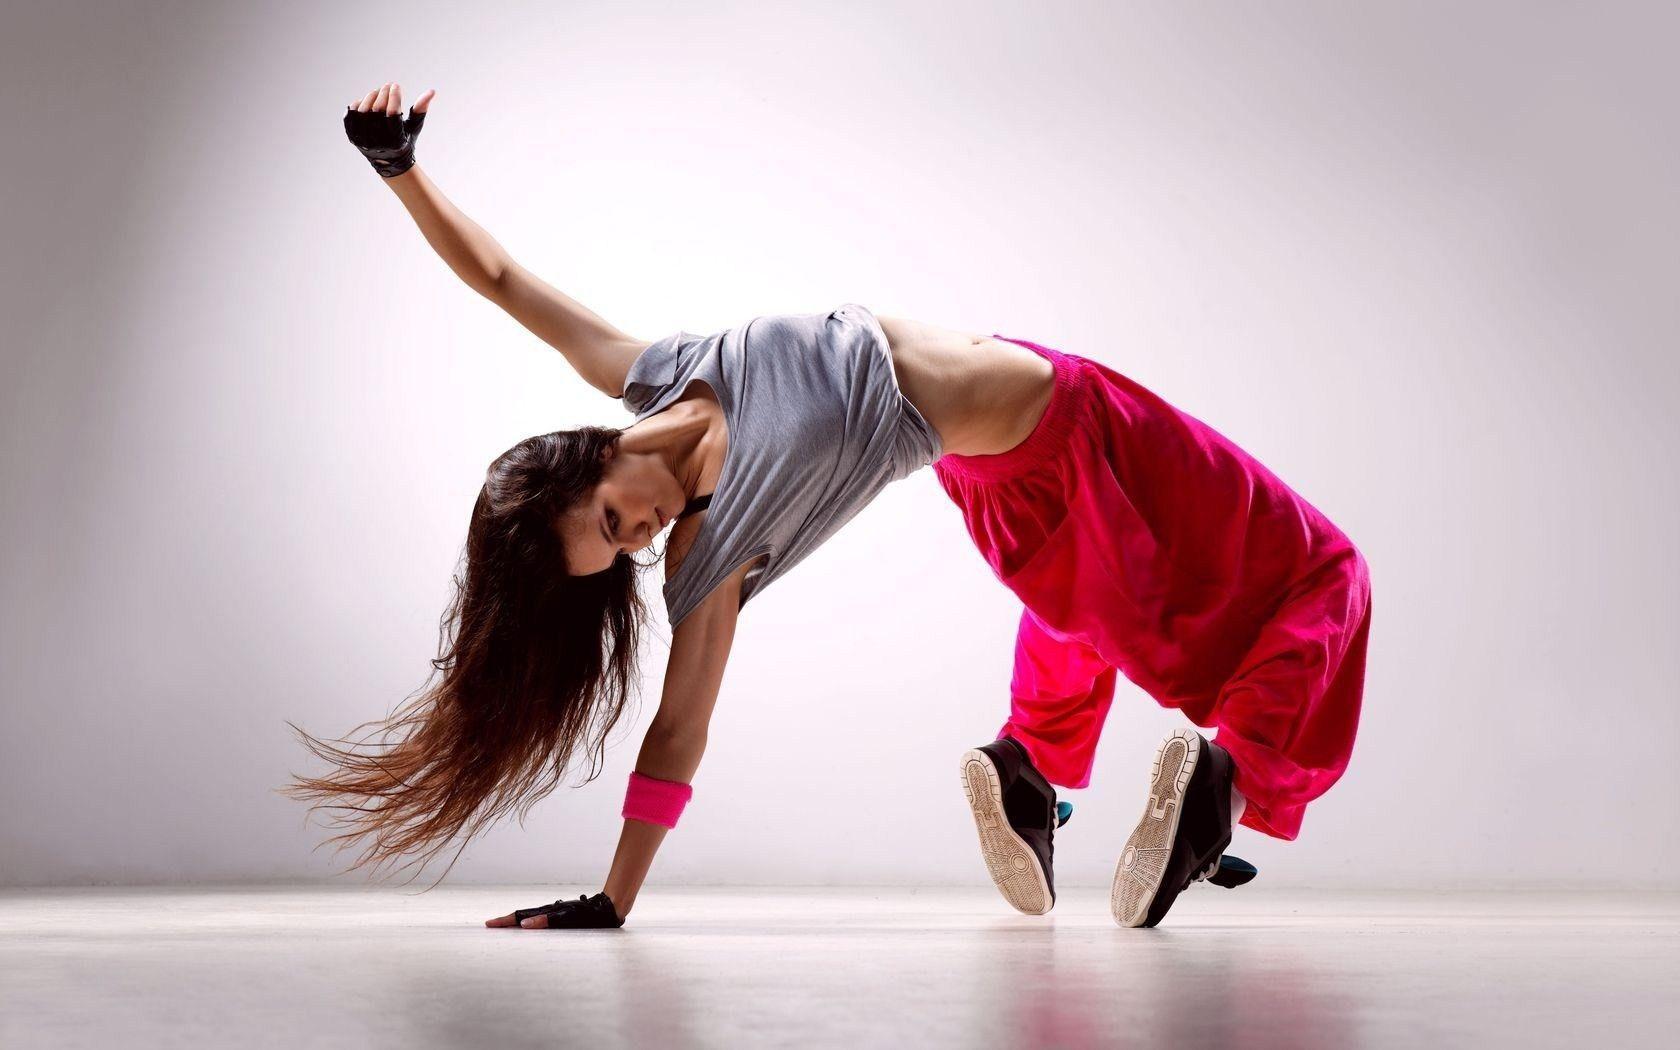 New Full HD Wallpaper's Collection: Dance Graphics Wallpaper 44